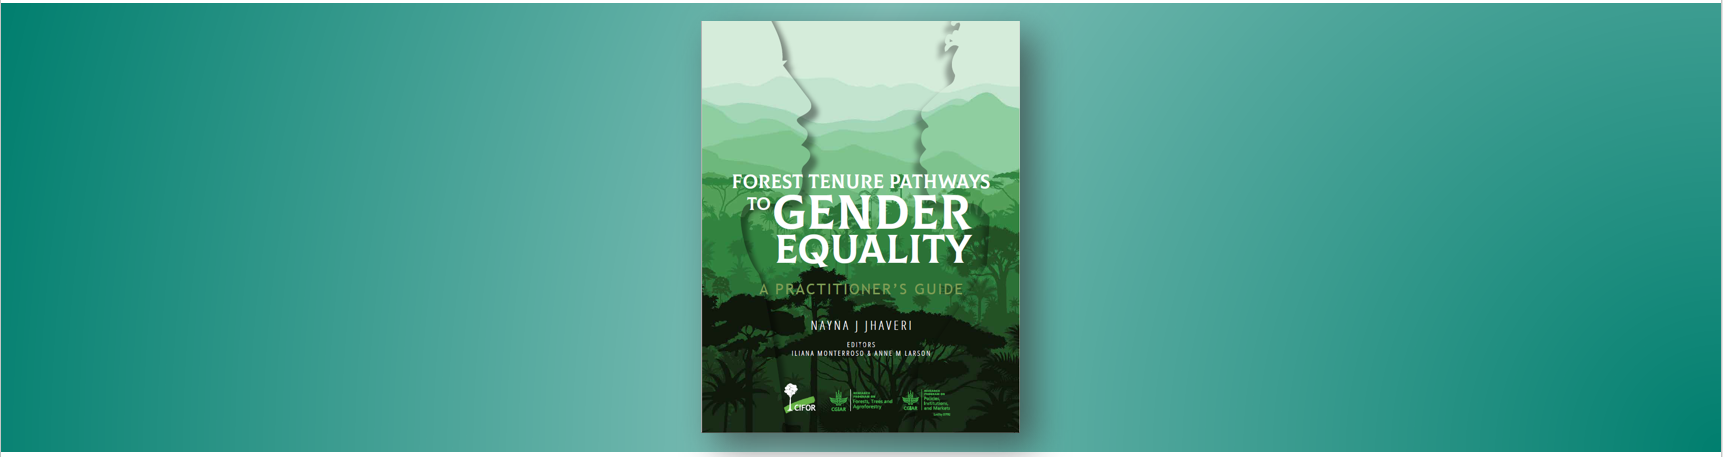 Forest tenure pathways to gender equality: A practitioner’s guide